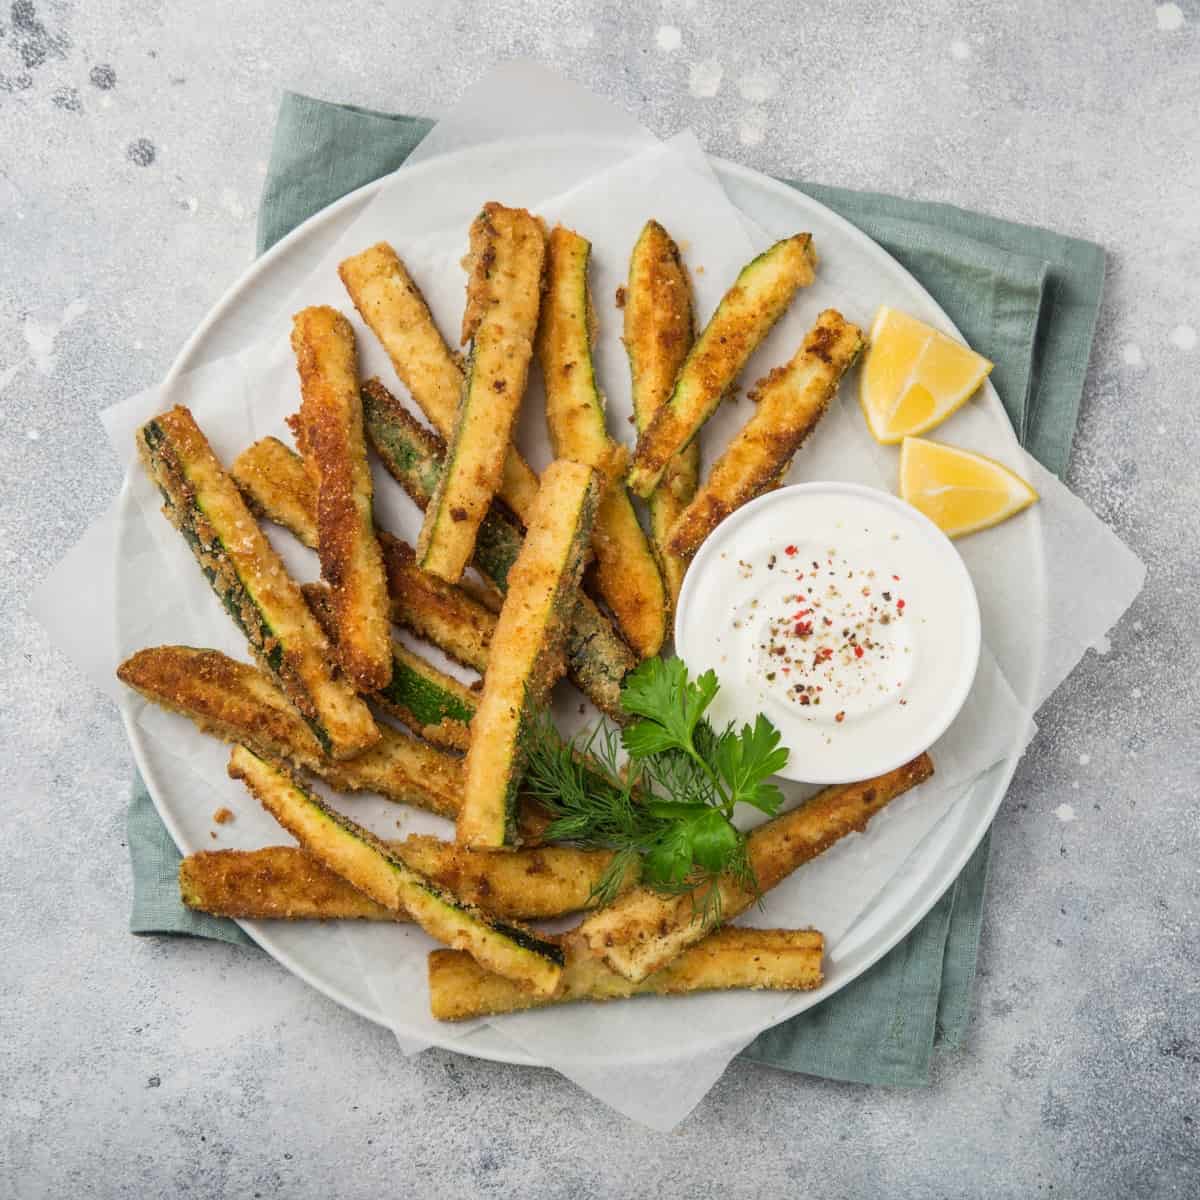 Baked zucchini fries on white plate with Greek yogurt dipping sauce and lemon wedges from above.